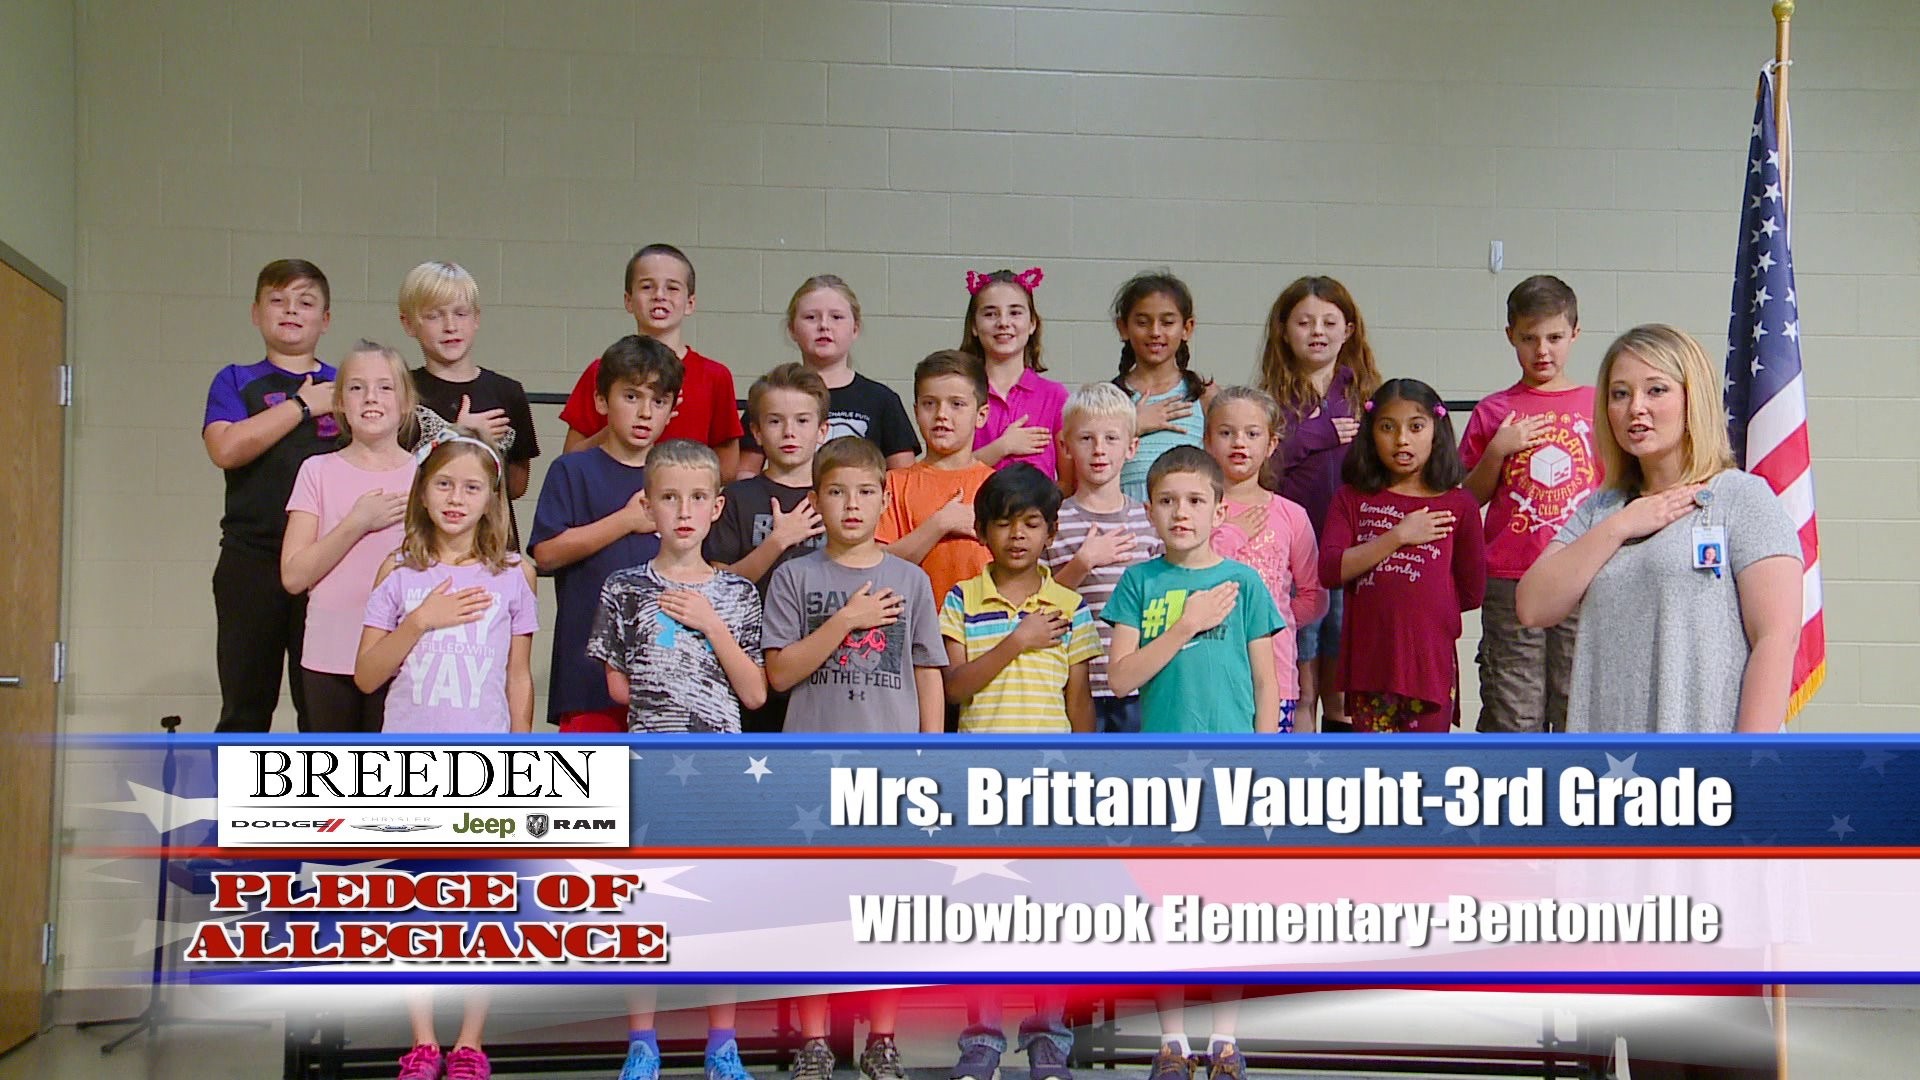 Mrs. Brittany Vaught  3rd Grade Willowbrook Elementary, Mansfield